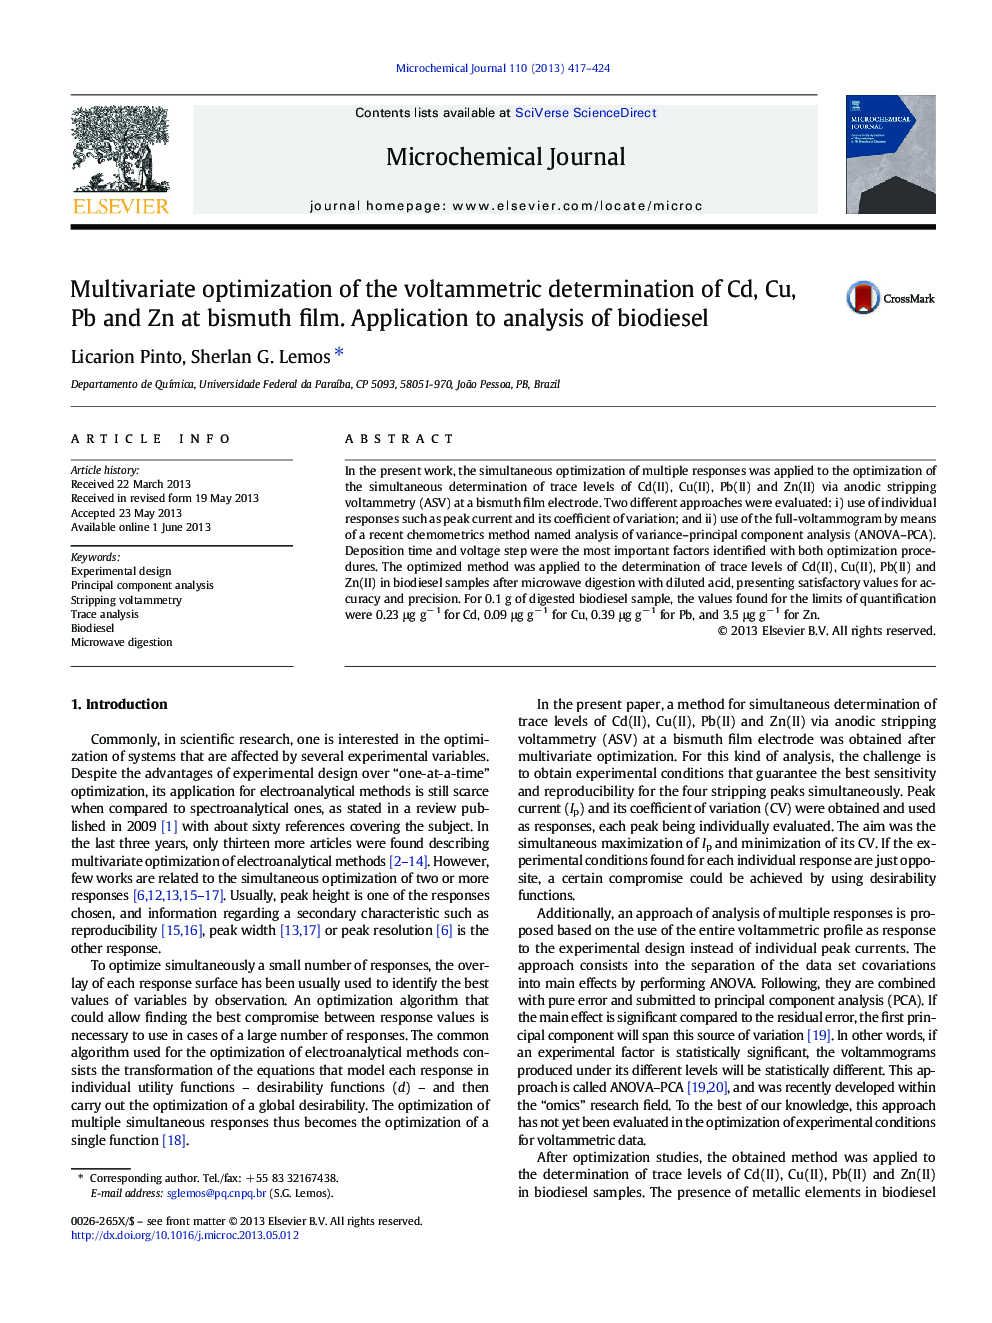 Multivariate optimization of the voltammetric determination of Cd, Cu, Pb and Zn at bismuth film. Application to analysis of biodiesel